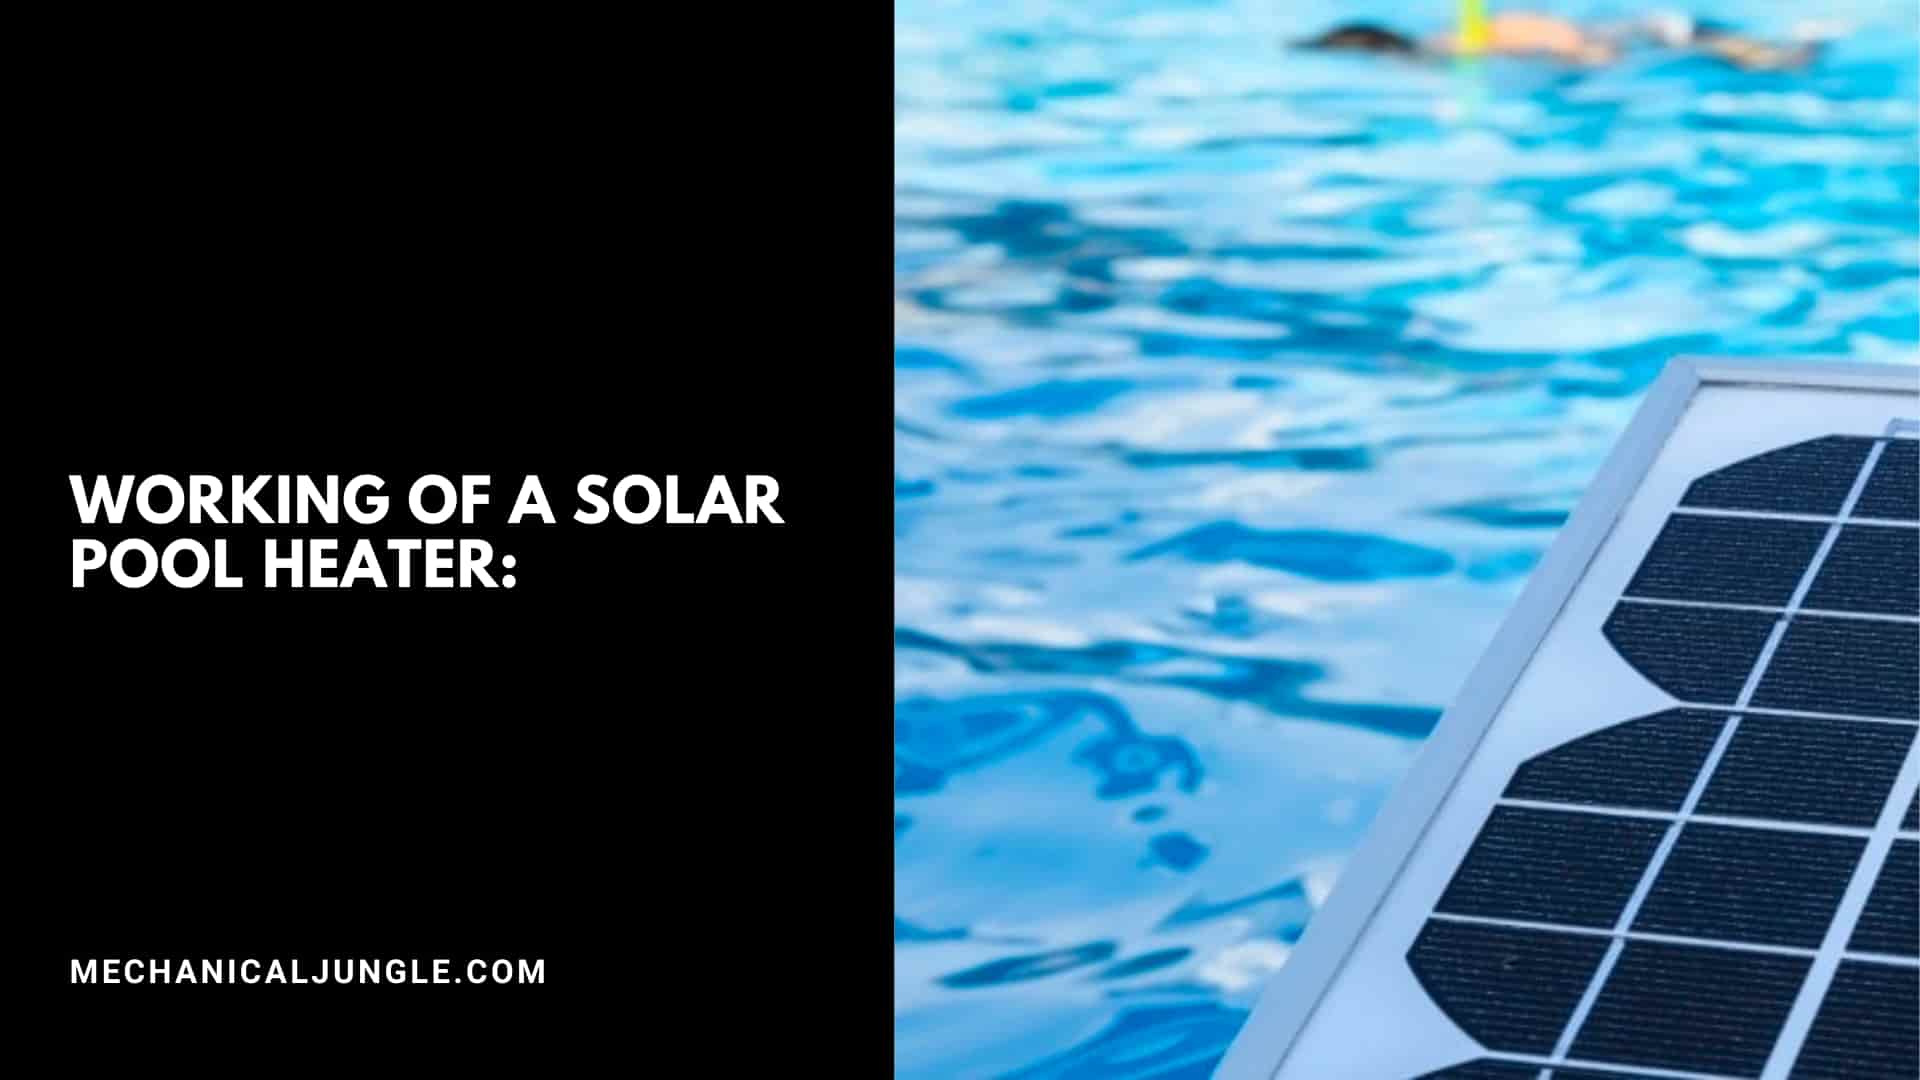 Working of a Solar Pool Heater: